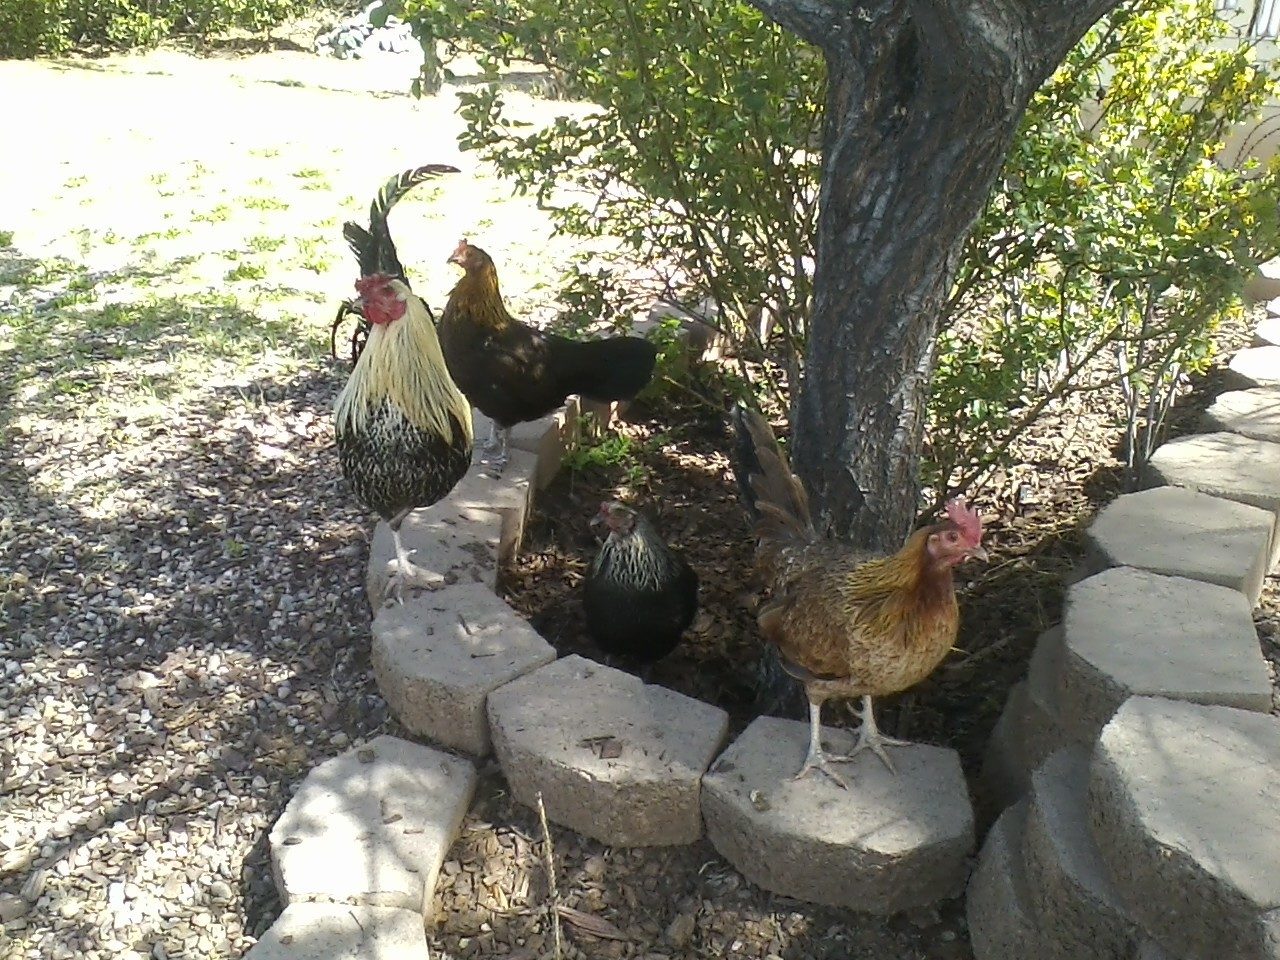 This is the family of American Game Bantams that I own. The hen on the right is cornellia; shes the mother. Last summer a beat-up wing-clipped skinny chicken wandered into my yard. I started feeding her and she stayed... a week later she dissapeared and for the next 3 weeks I only saw her for brief moments. All off a sudden one morning she had 6 little chicks behind her as they foraged and ran around the yard.